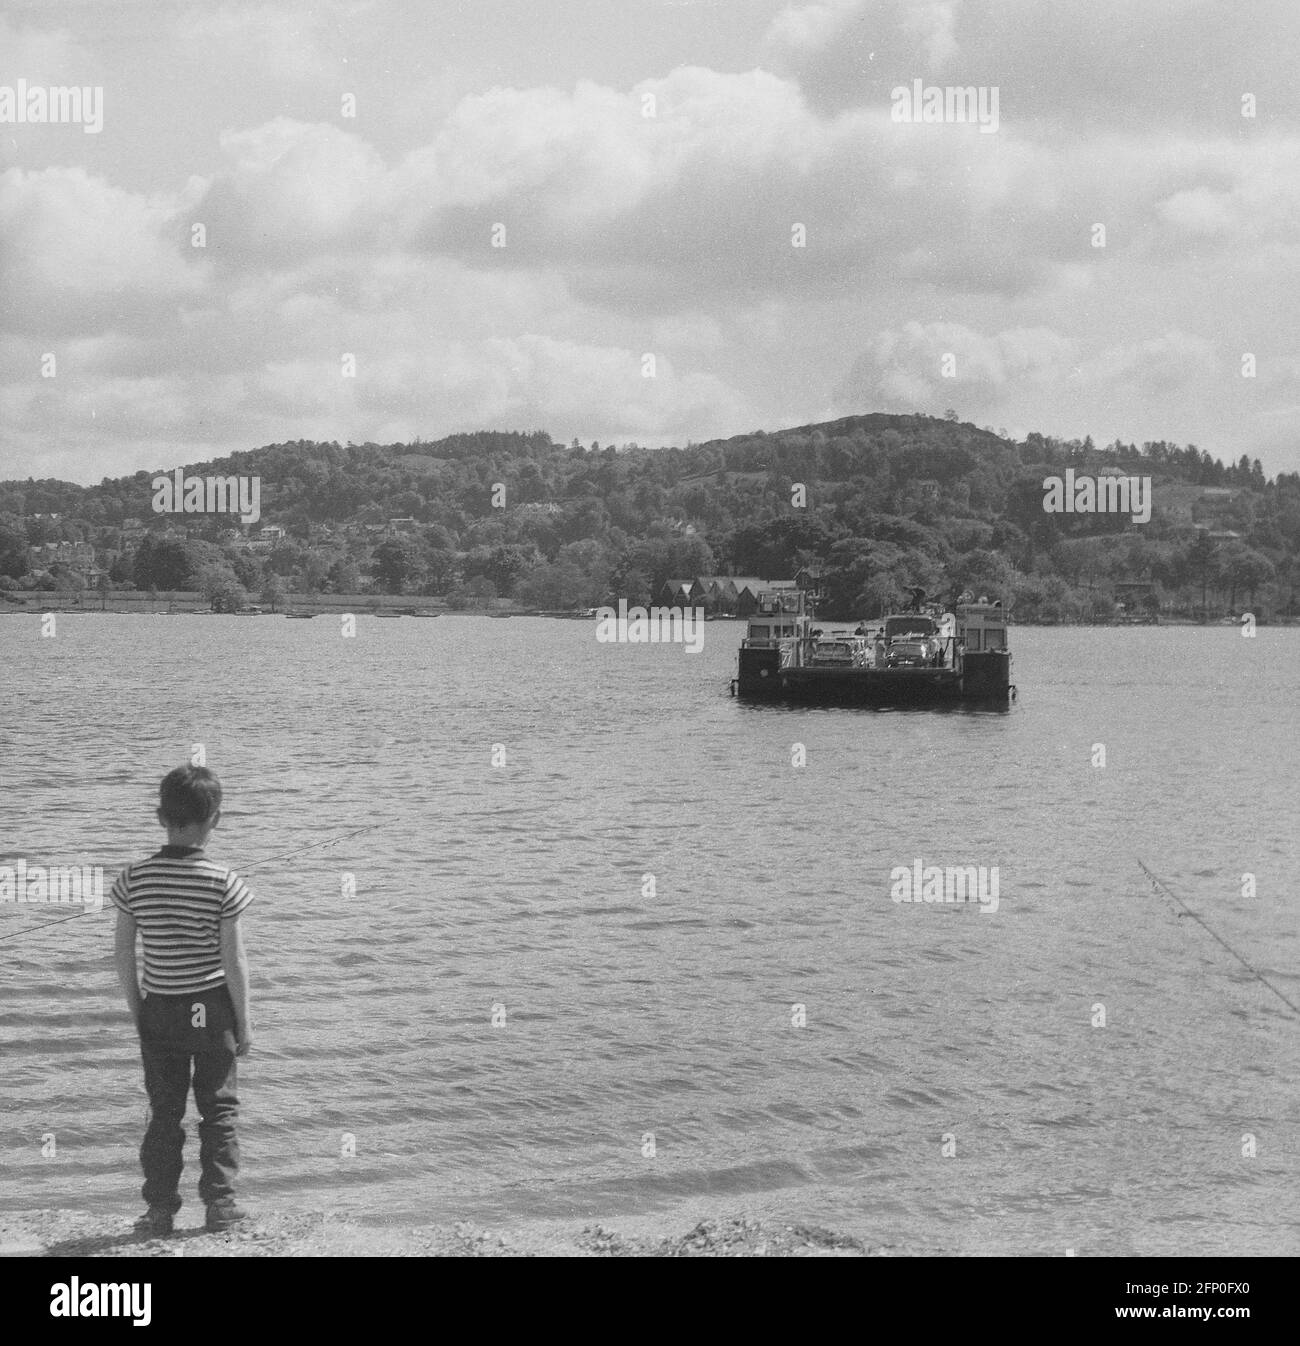 1961, historical, a young boy standing shoreside beside the calm water of a loch, watching a small cable or chain ferry taking cars and people going across the lake, Highlands of Scotland. There are hundreds of small off-shore islands in Scotland and some of the remote ones can only be reached by ferry. A cable ferry goes across a body of water pulled by cables connected to both shores, early cable ferries used rope or steel chains, hence the name of chain ferry. Stock Photo